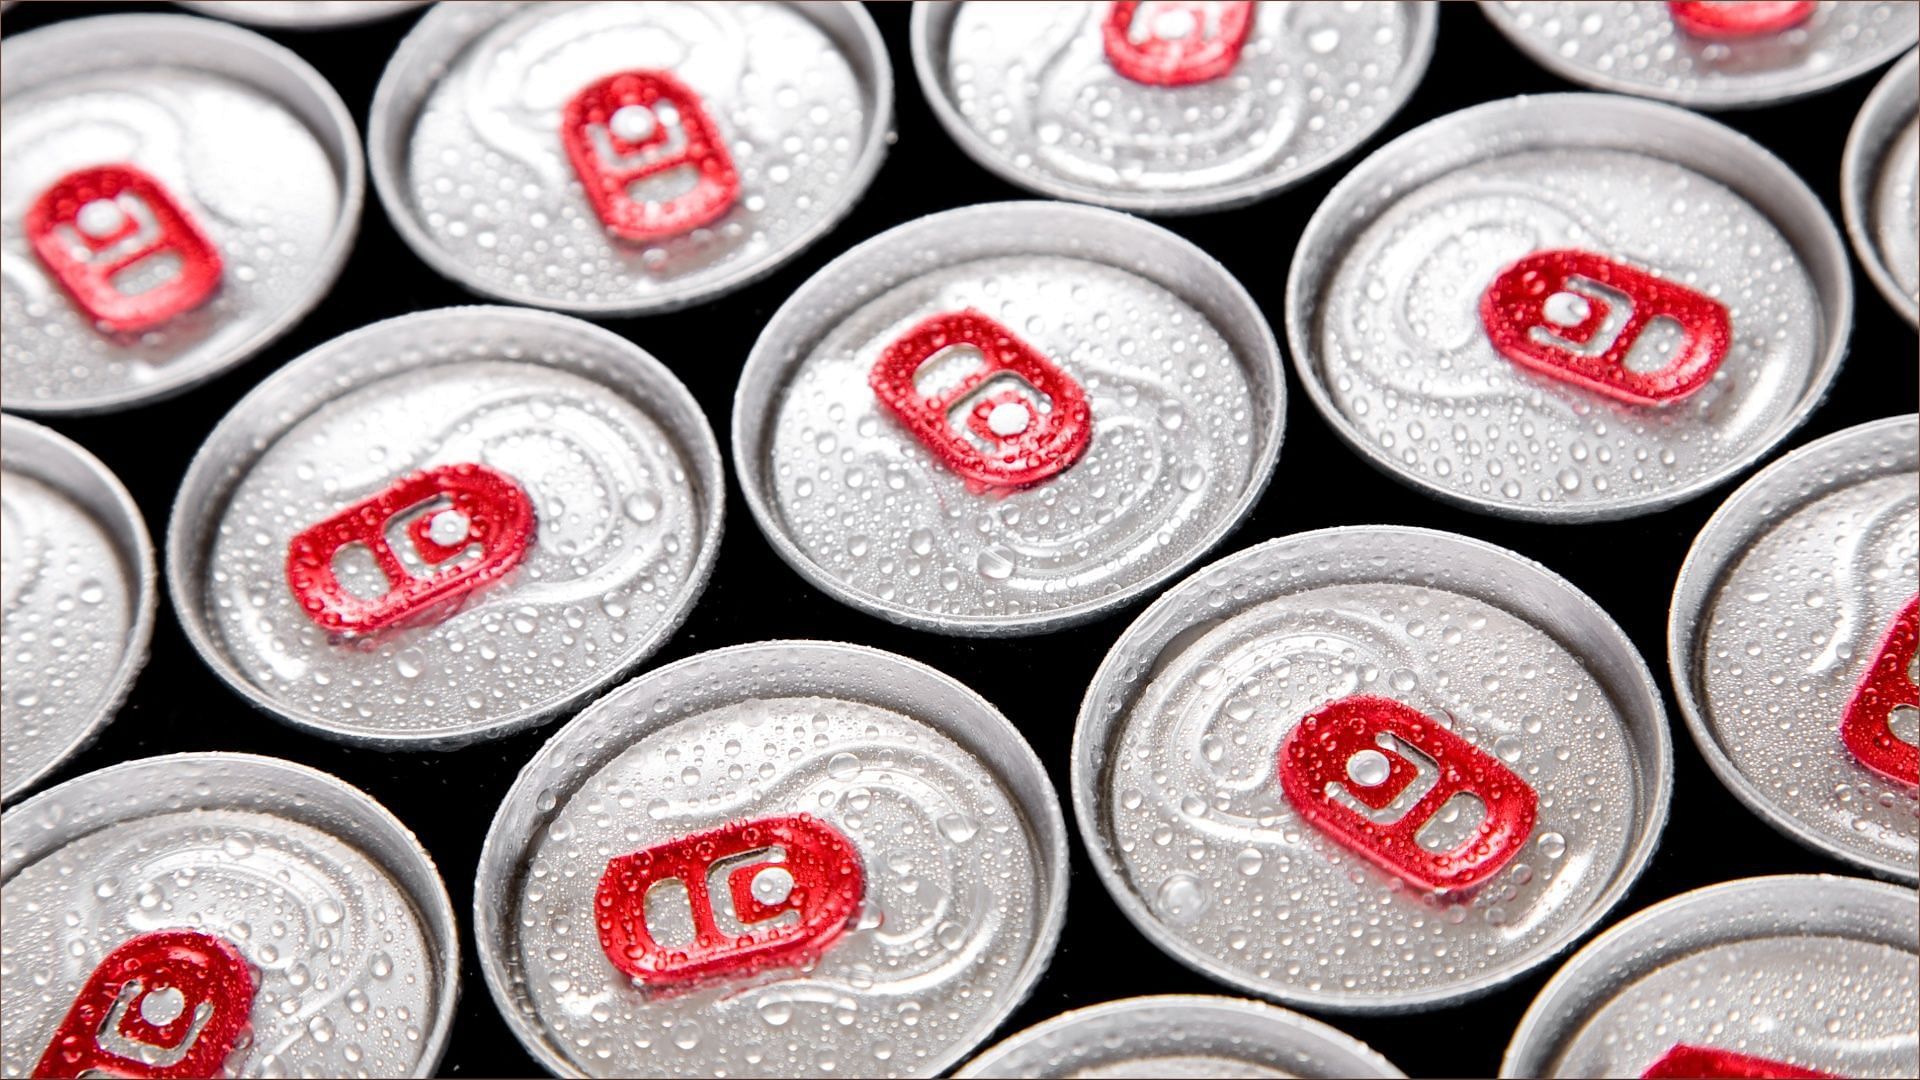 Energy drink recall extension Reason, brands, and other details explored